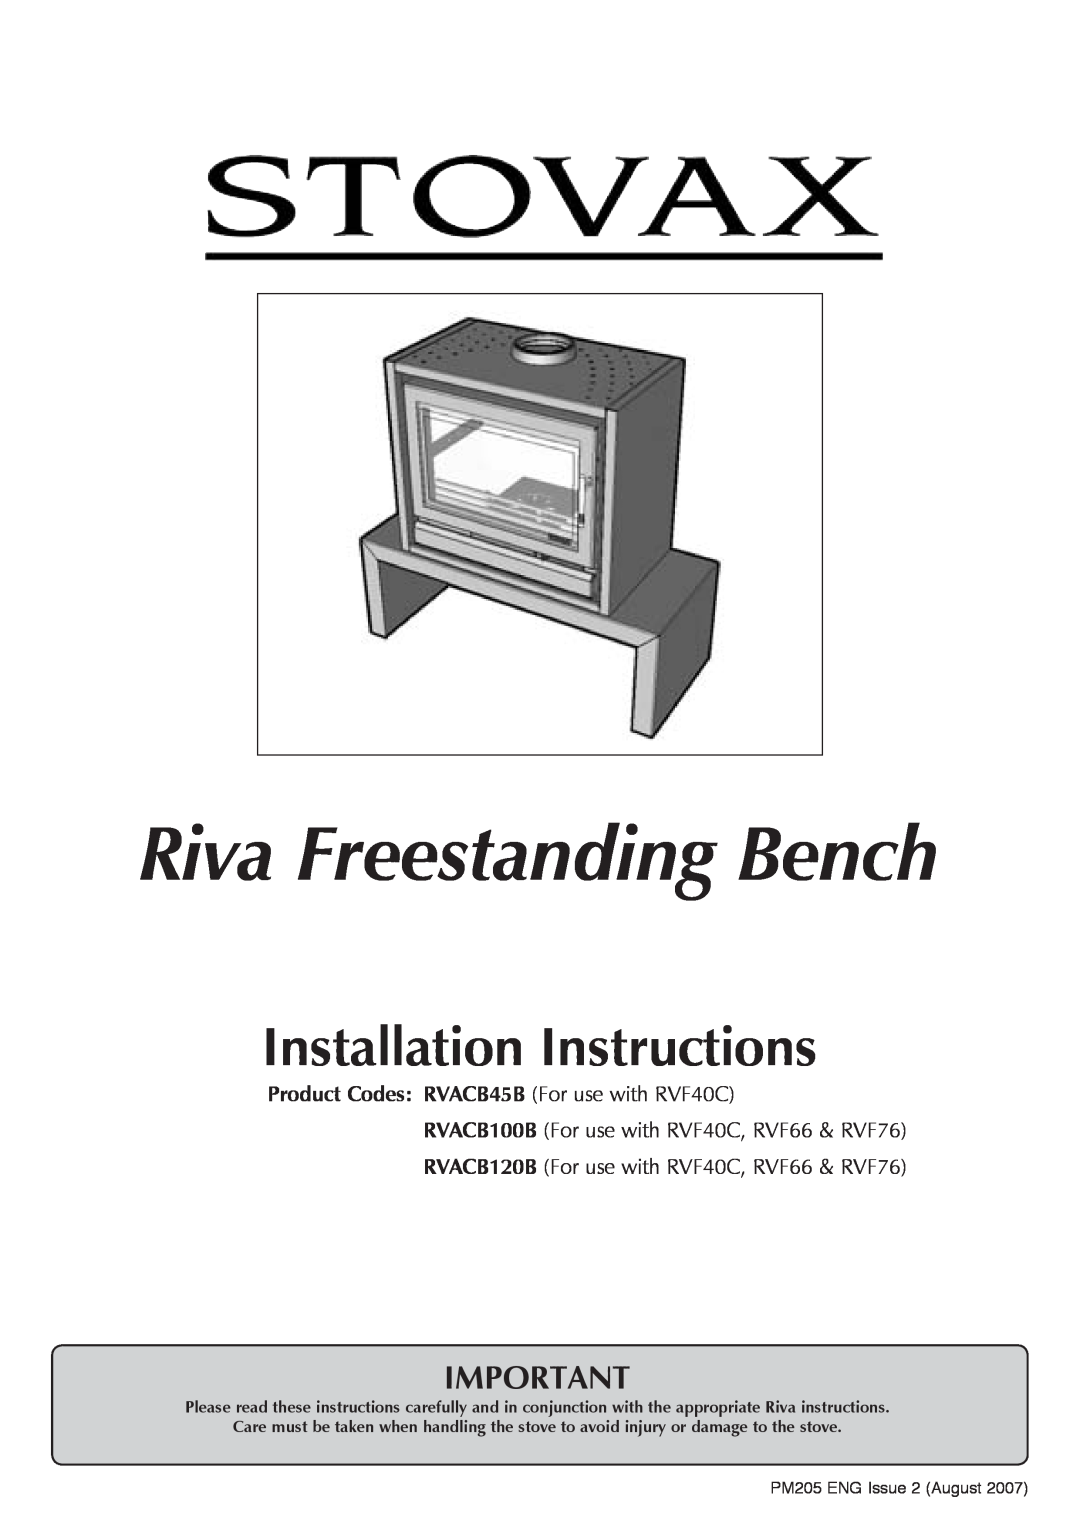 Stovax RVACB100B installation instructions Product Codes RVACB45B For use with RVF40C, Riva Freestanding Bench 